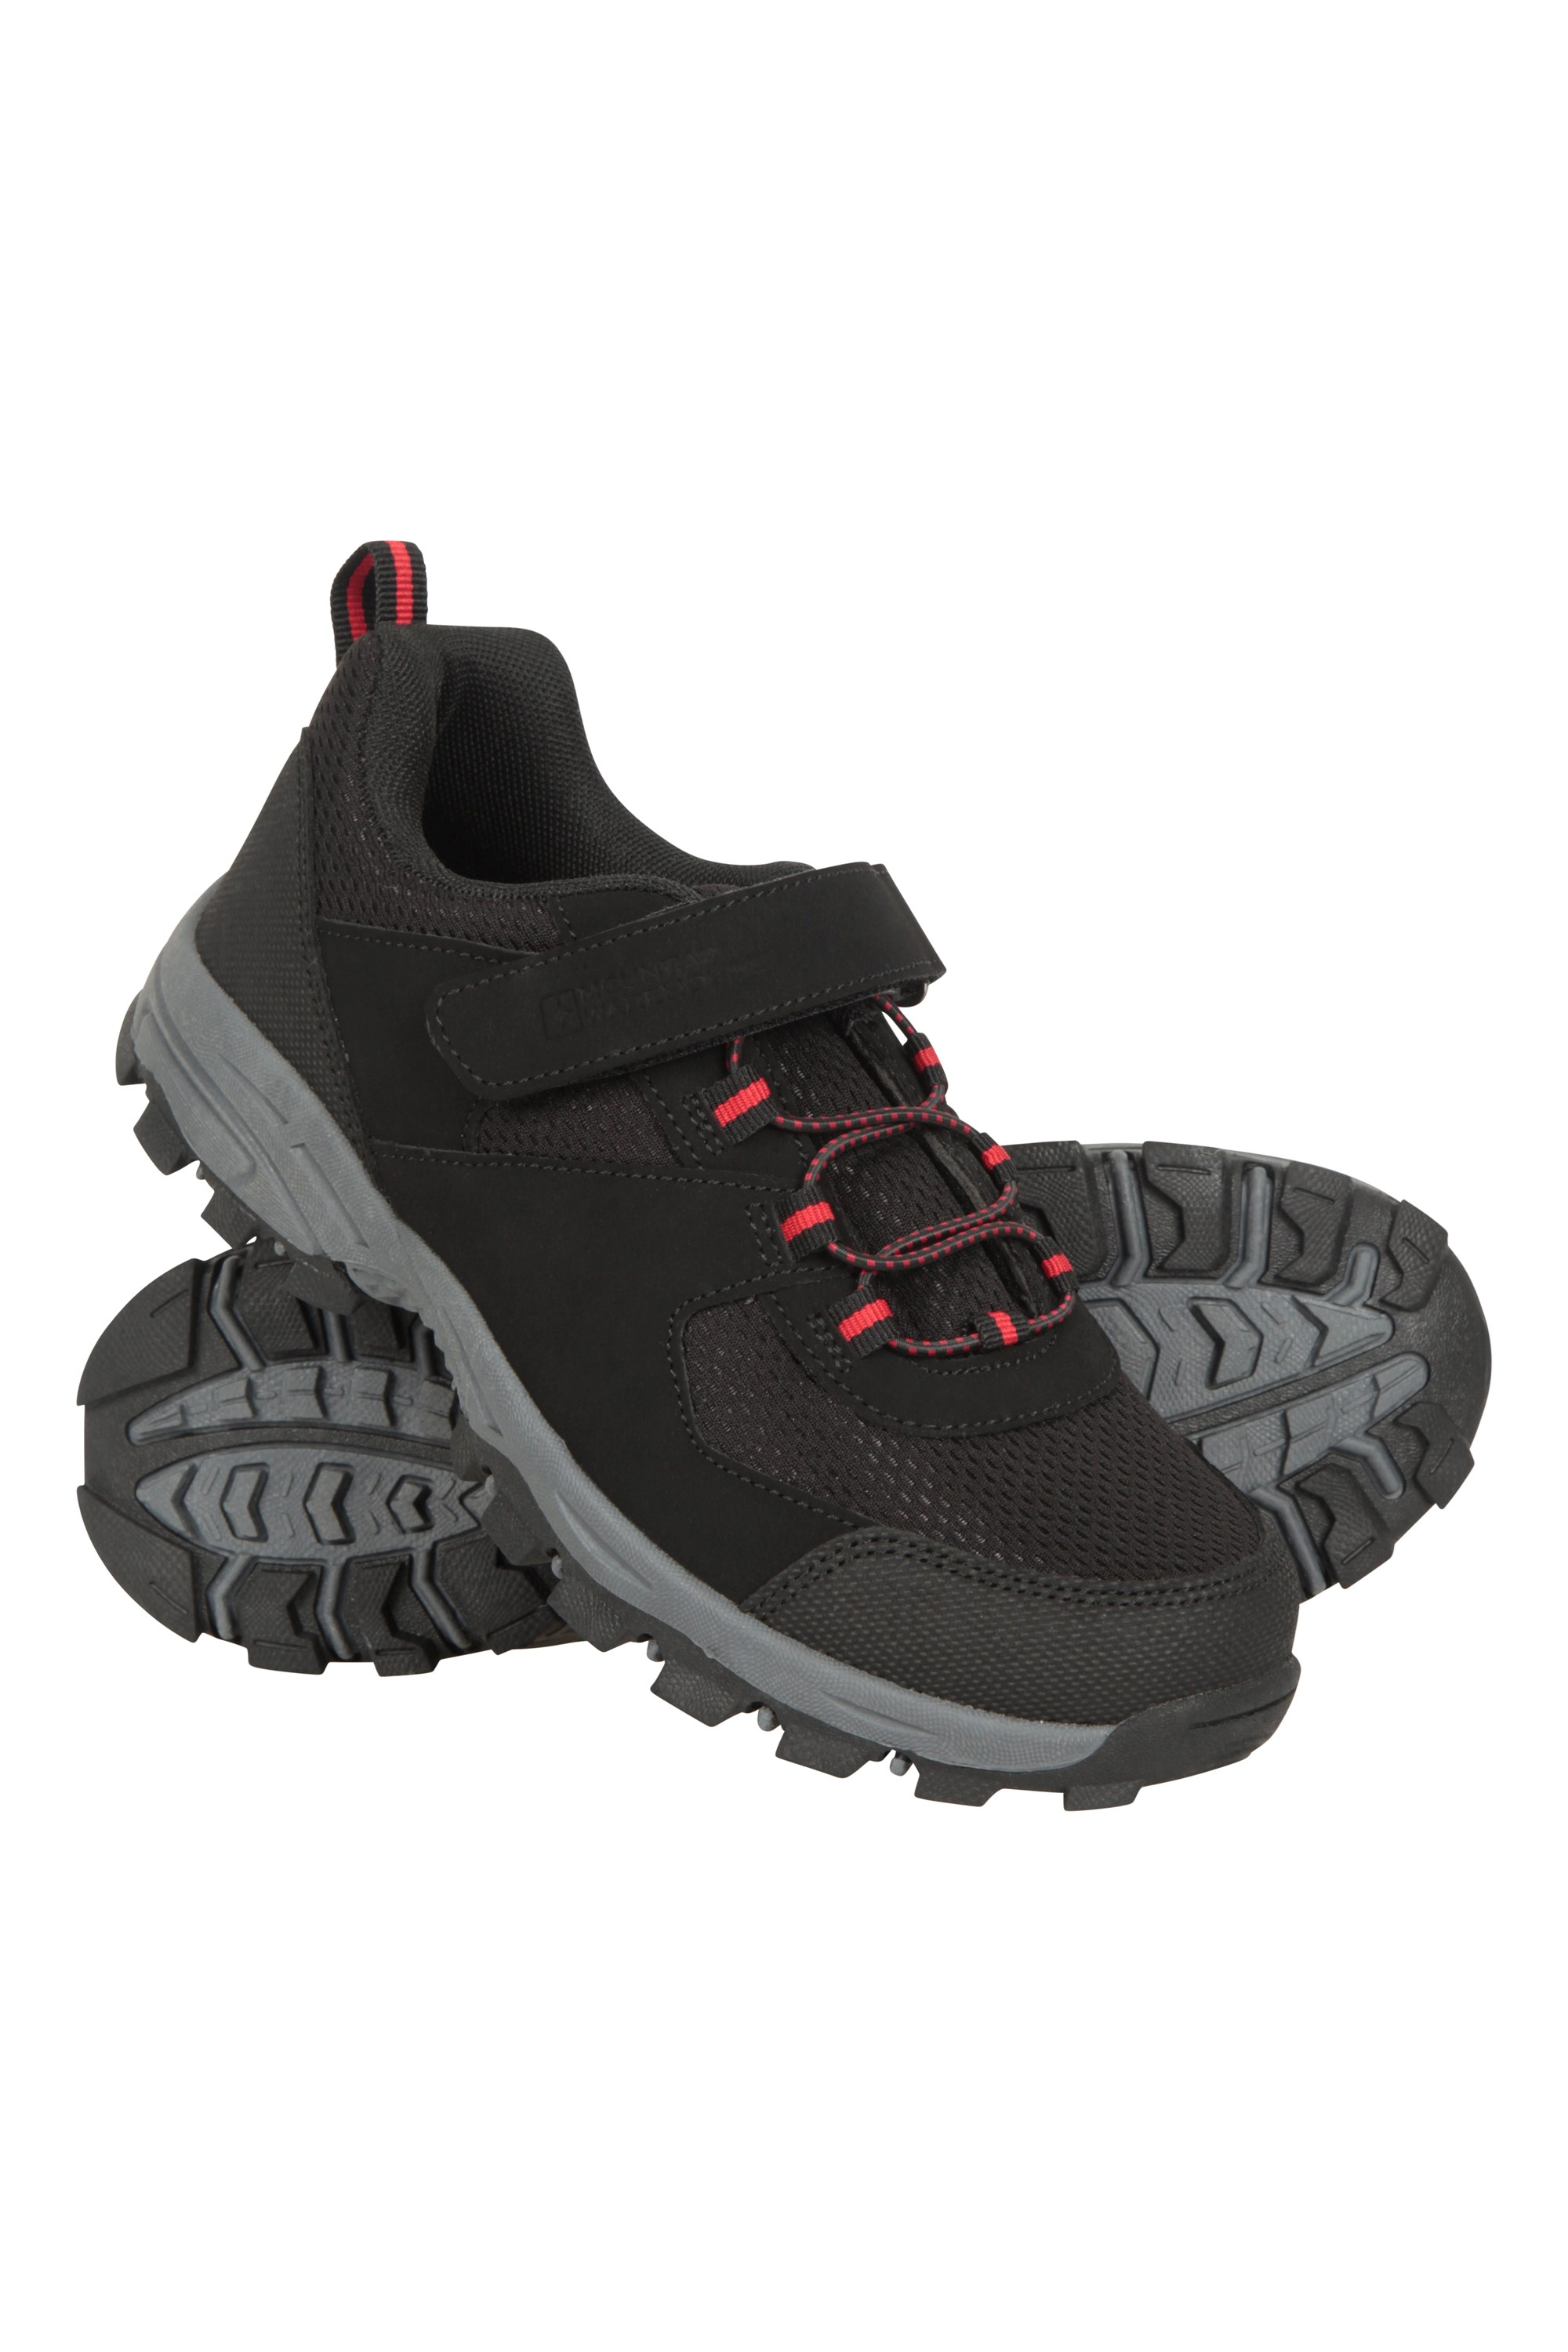 McLeod Kids Outdoor Hiking Shoes